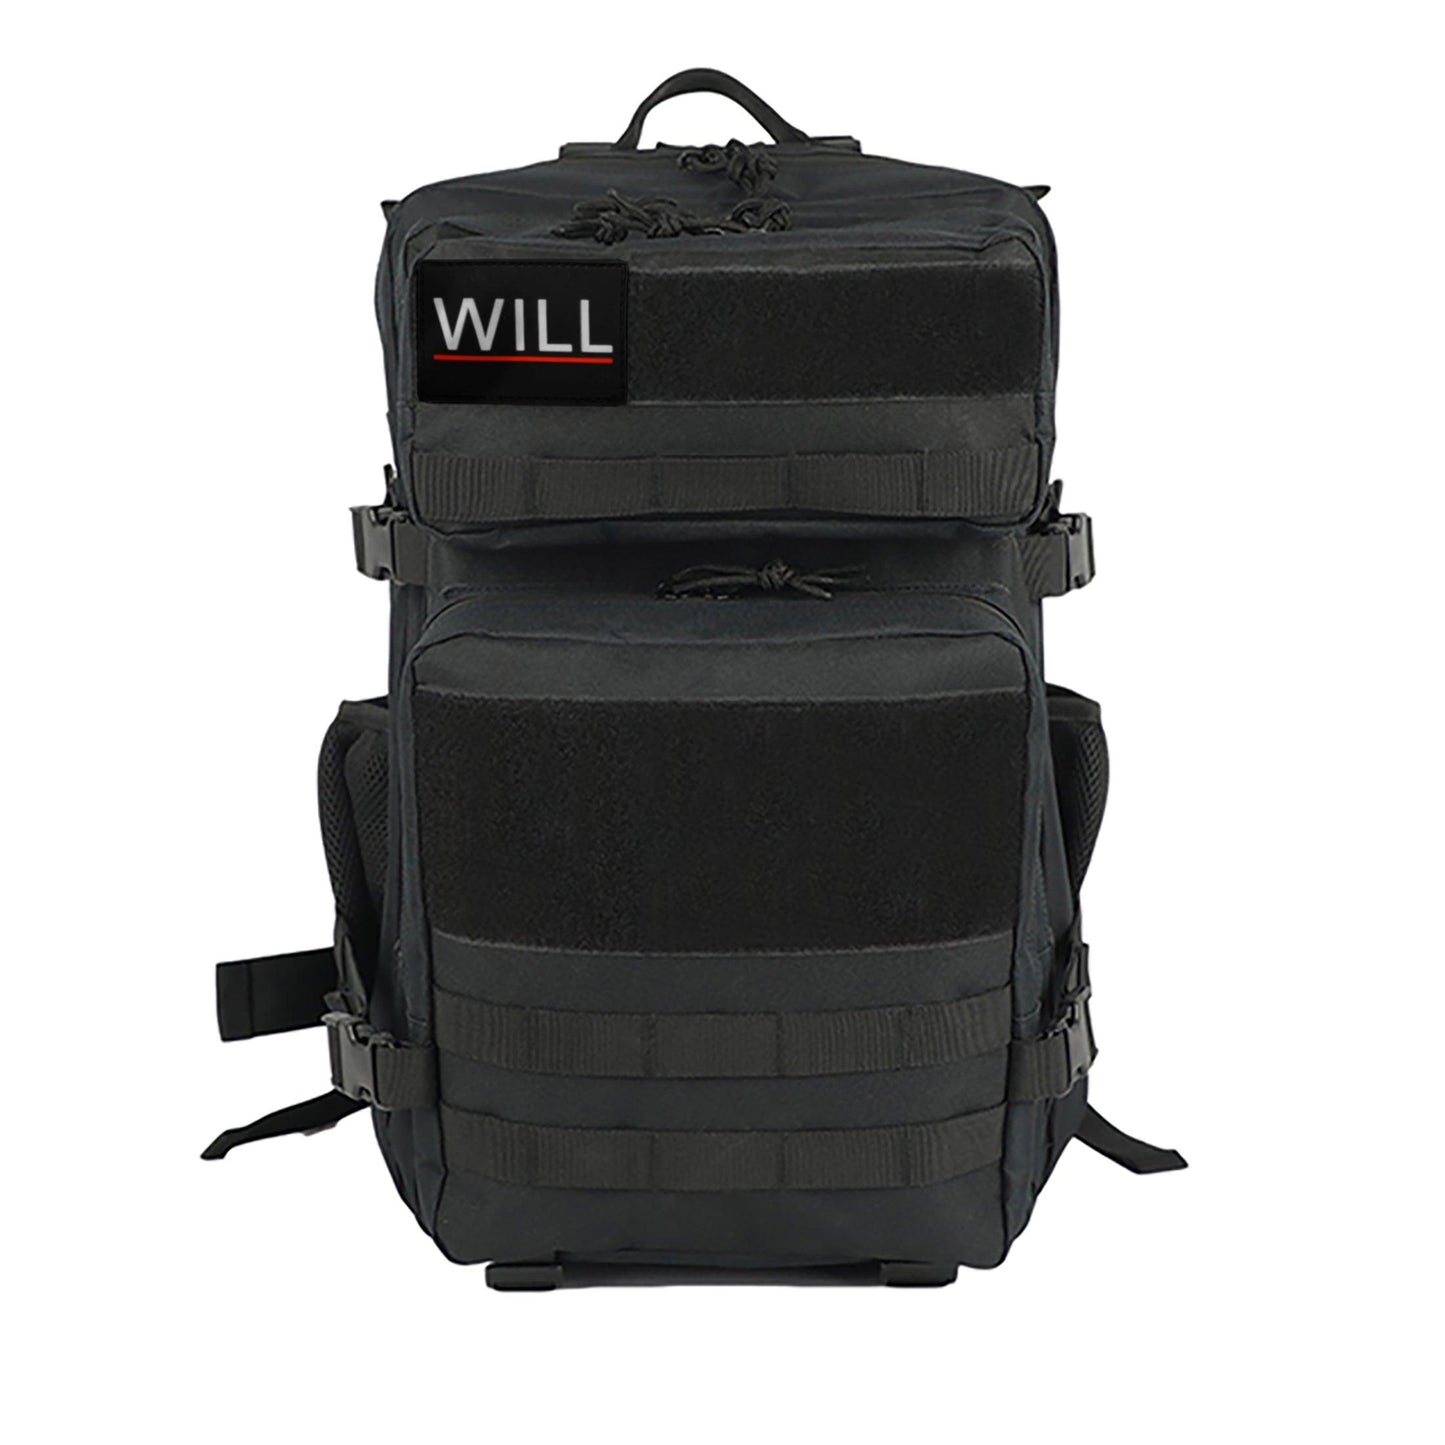 Willbag Pro - Will Bags